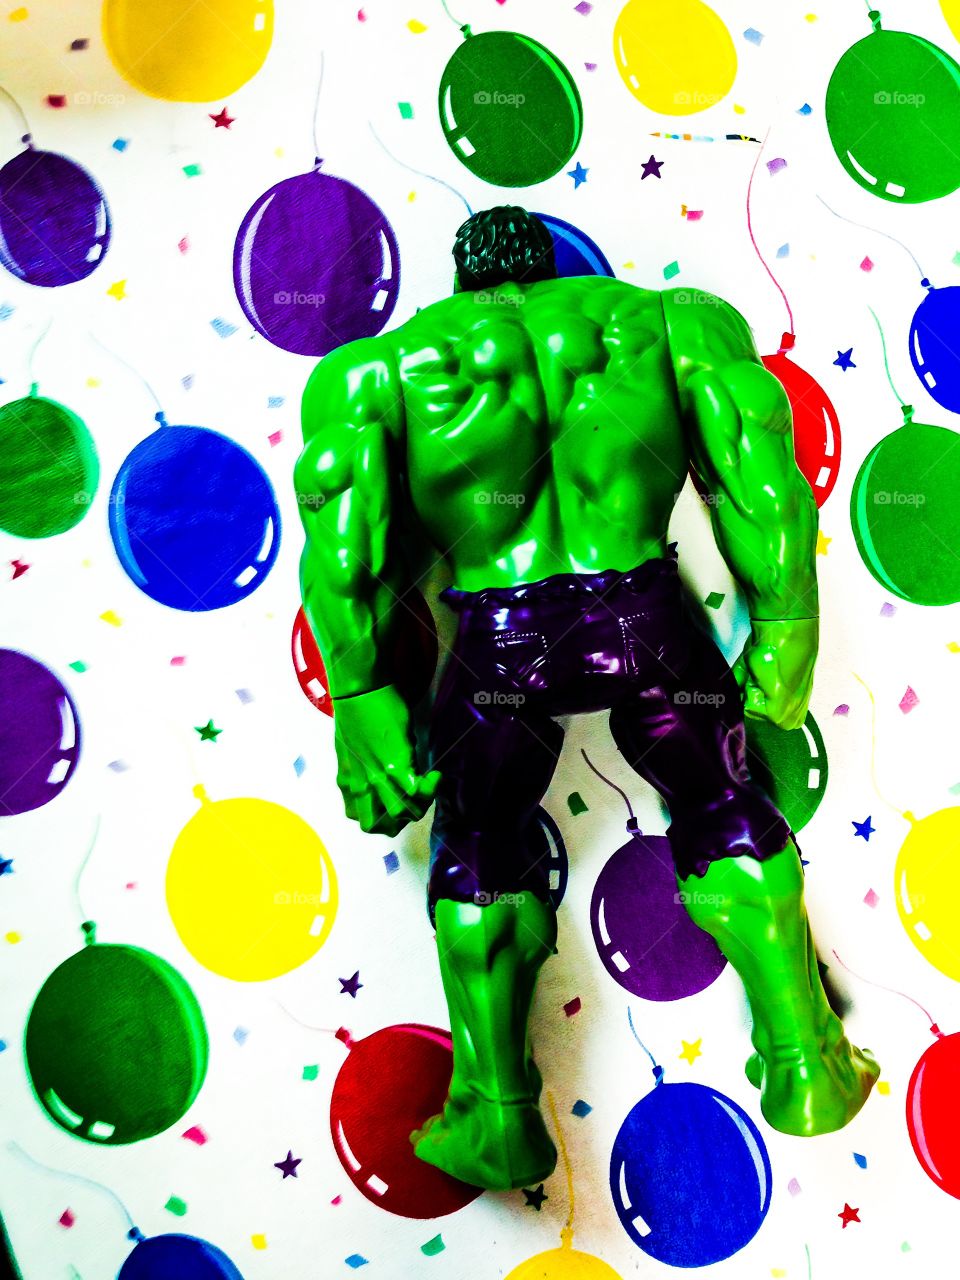 When the Hulk parties too hard